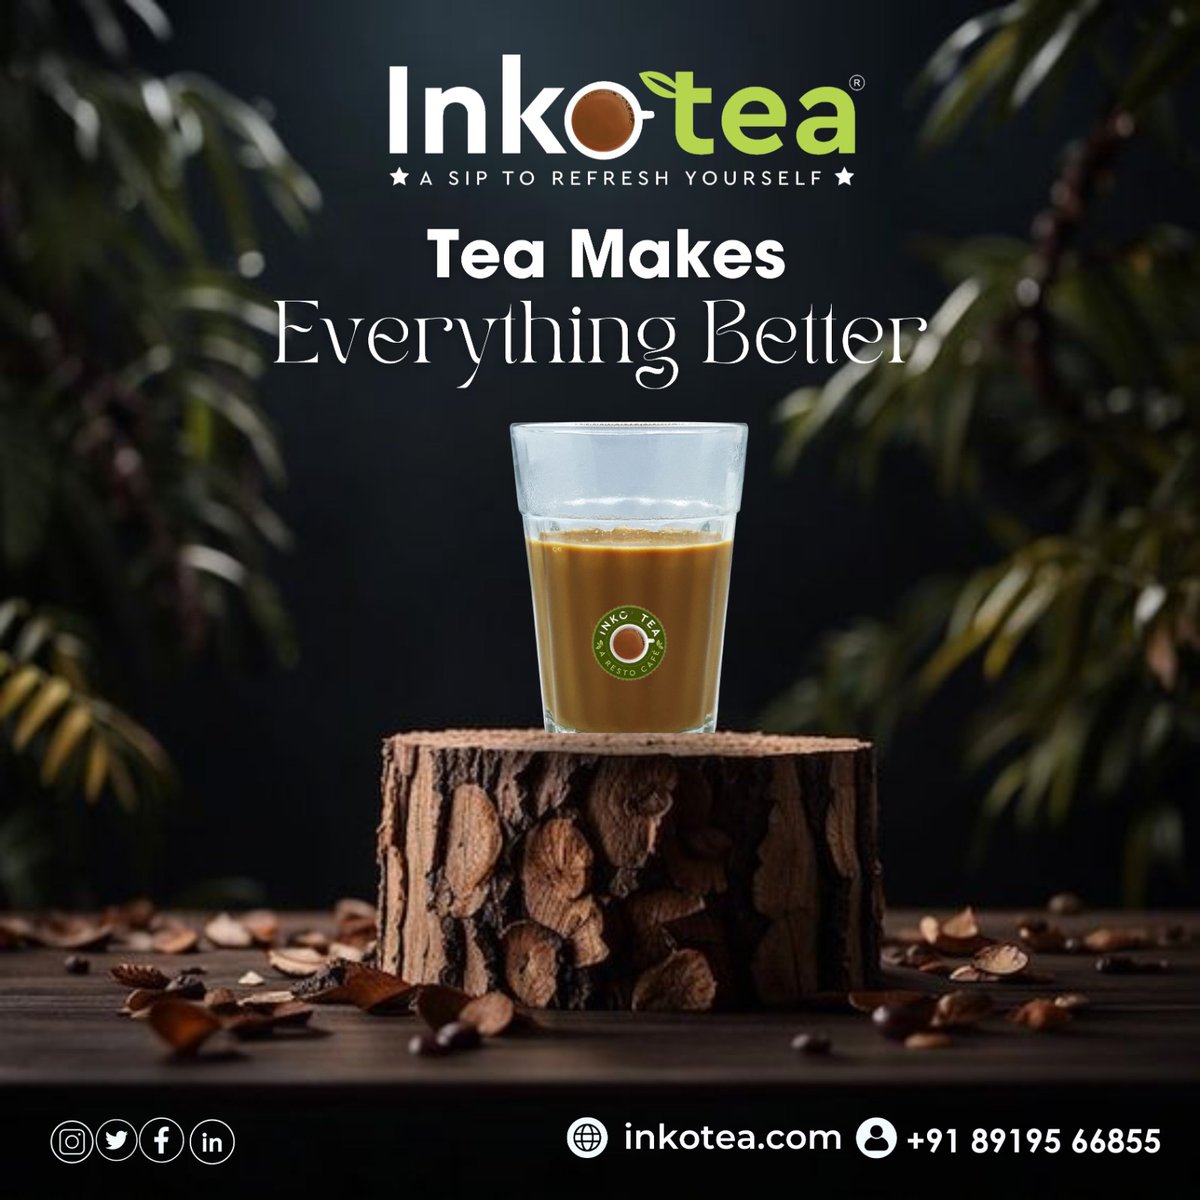 ✨ Tea makes everything better with Inkotea! 

Whether you're starting your day, taking a break, or winding down in the evening, our delicious teas are here to uplift your mood and soothe your soul

#Inkotea #TeaTime #SipAndSavor #TeaFlavors #TeaExploration #TeaAdventures #Tea